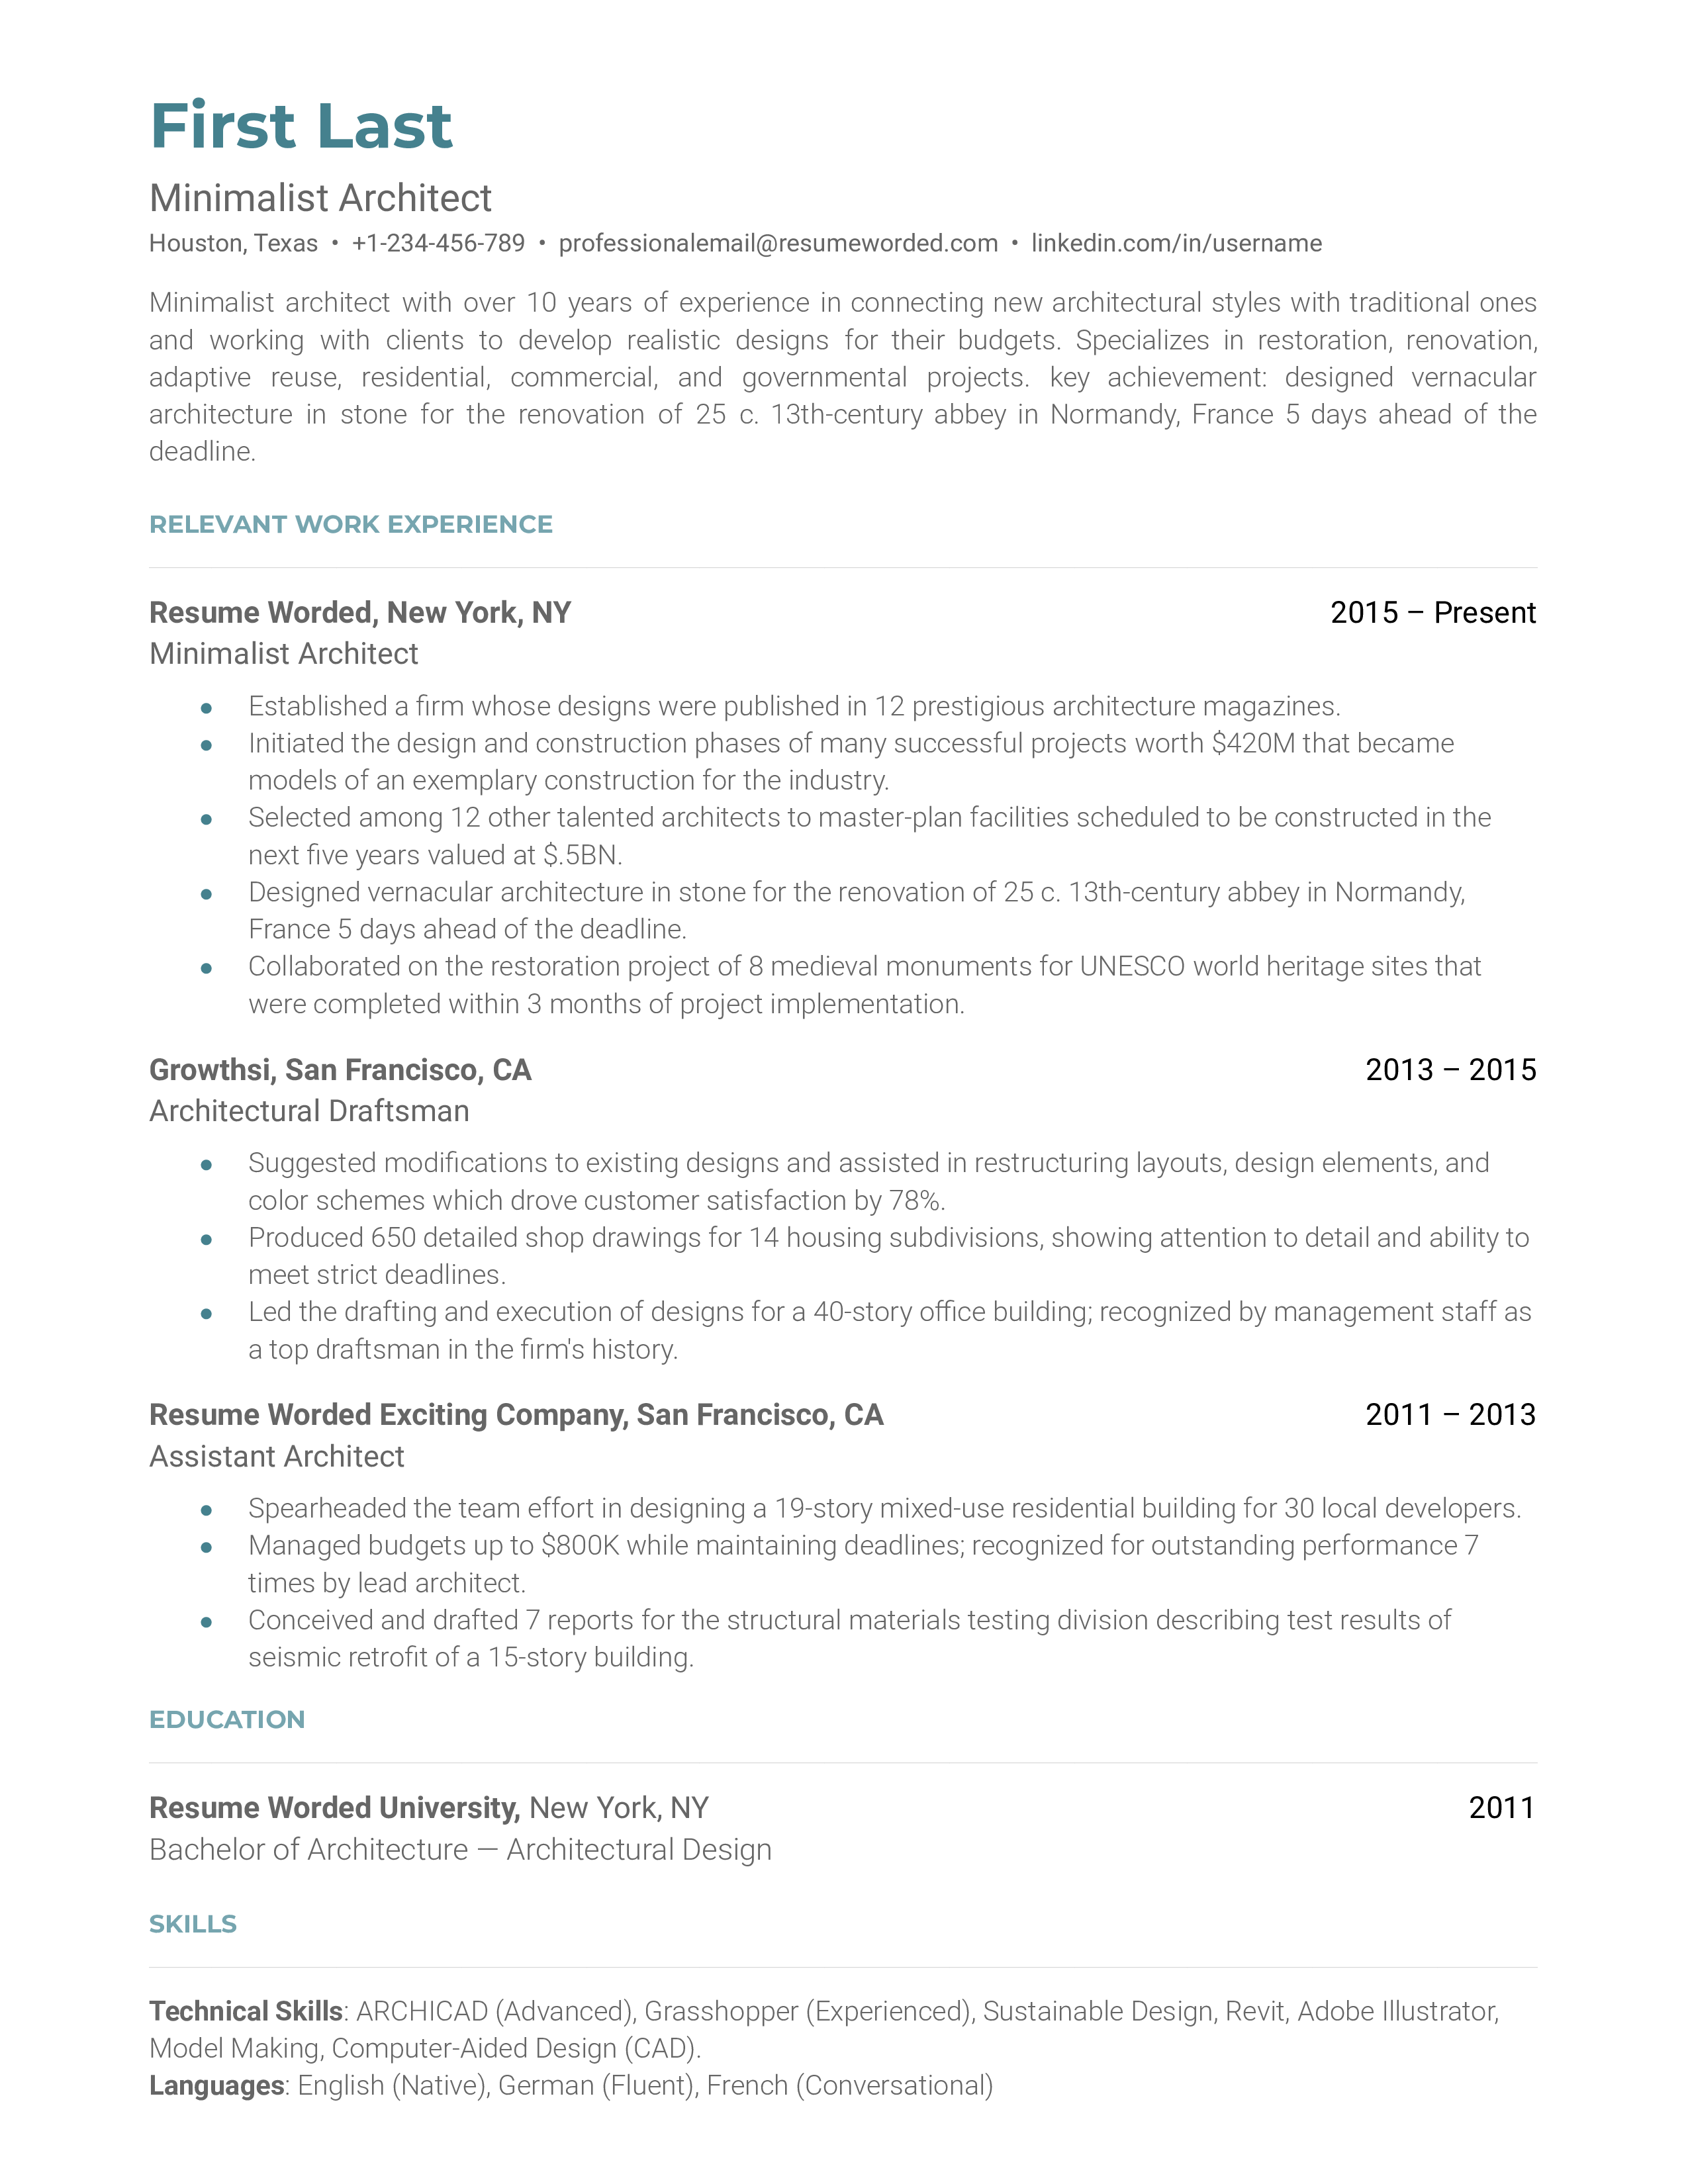 A minimalist architect resume sample that highlights the applicant’s minimalist experience and impressive achievements.